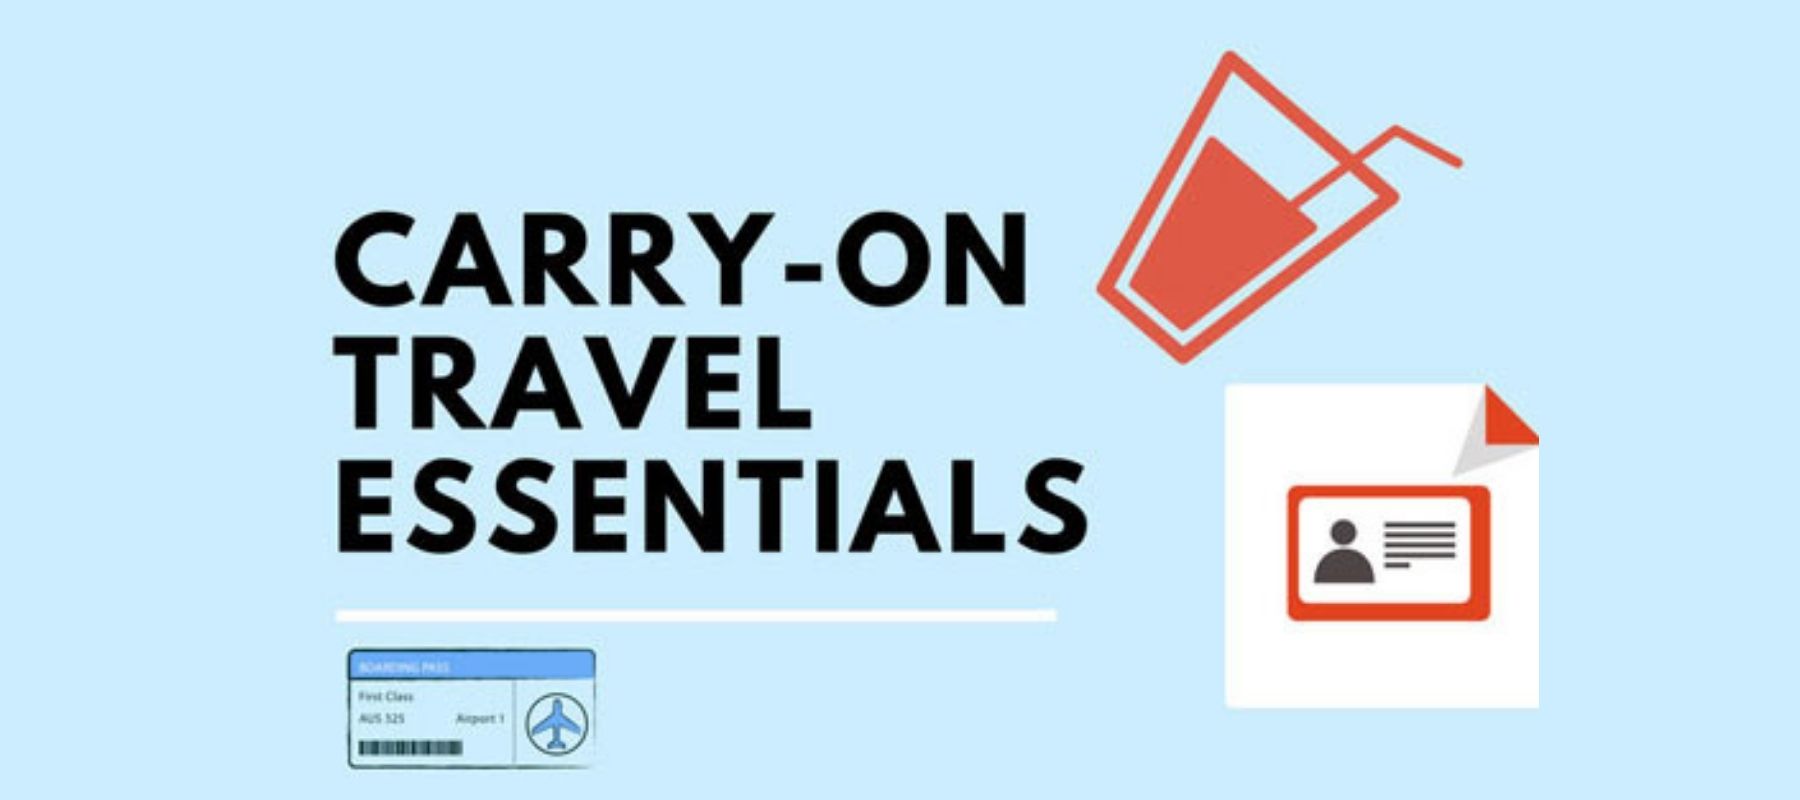 Carry-on Travel Essentials by Myntz! Breathmints Graphic